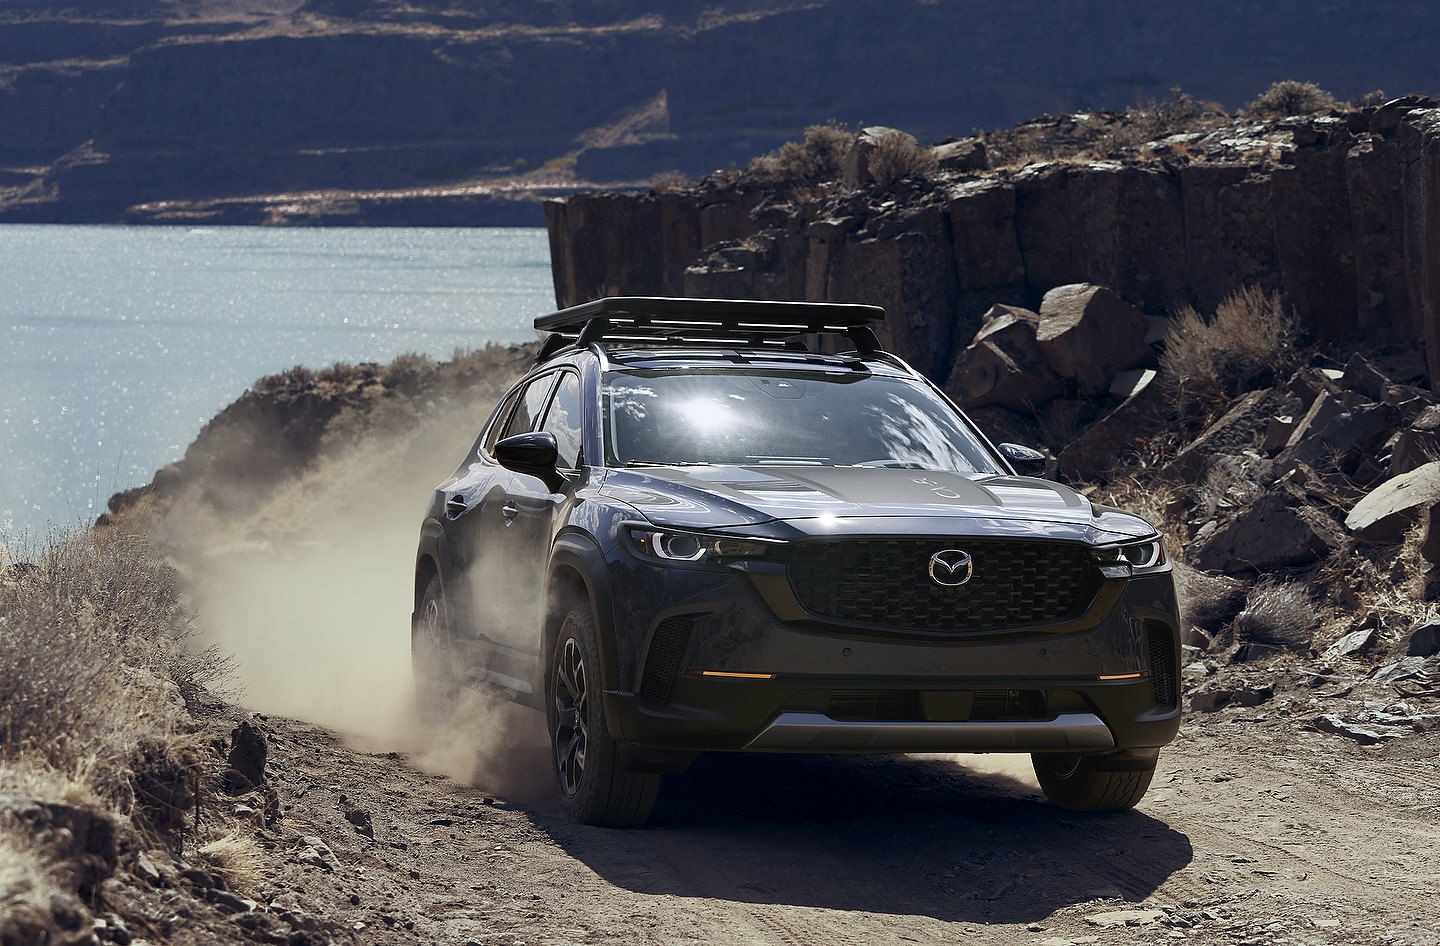 The all-new 2023 Mazda CX-50 is unveiled